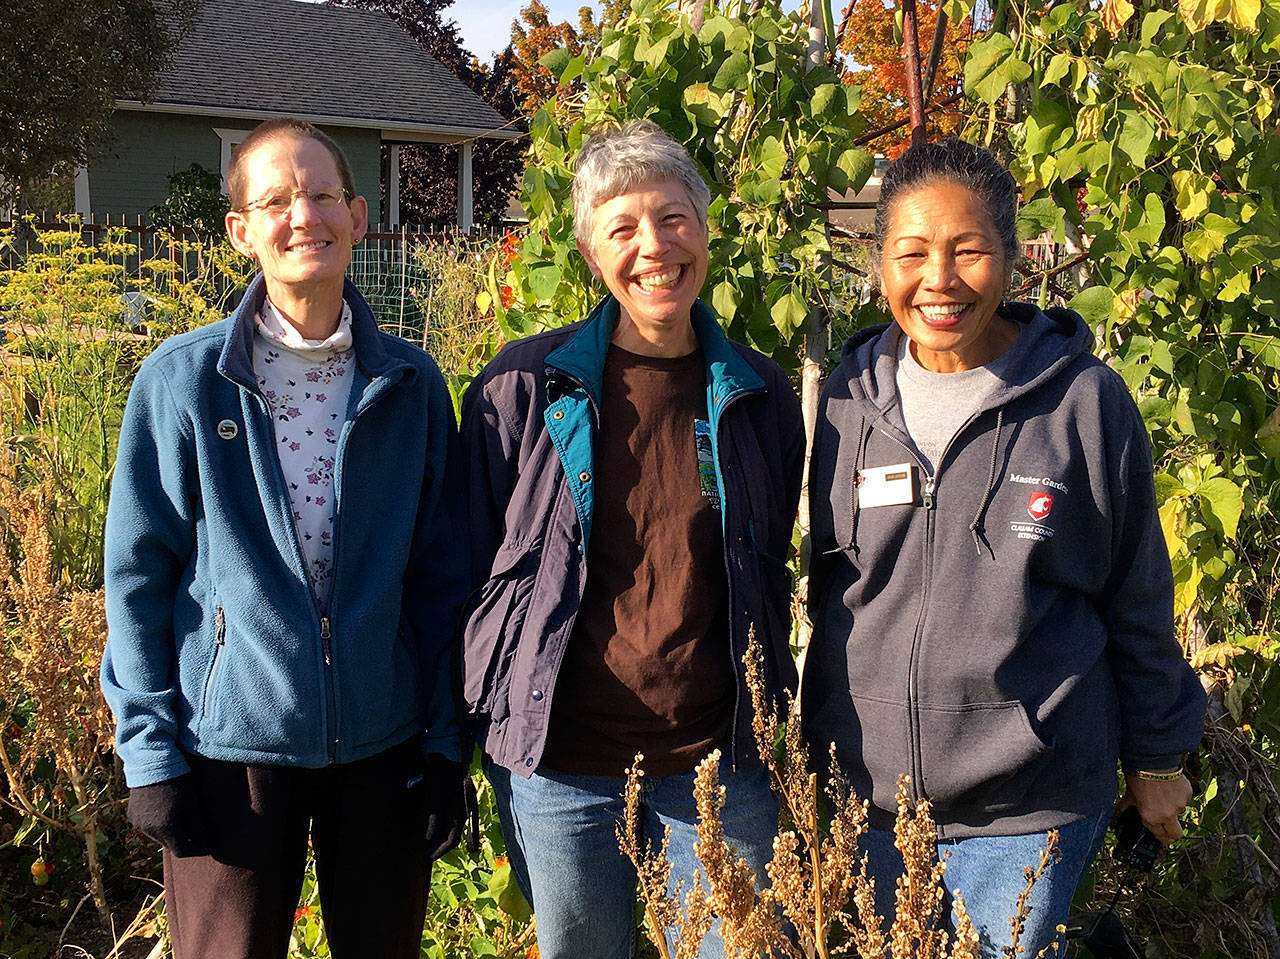 Editors for this year’s “Get It Growing” column include, from left, Clallam County Master Gardeners Beanie Gersbach, Jeanette Stehr-Green and Audreen Williams, and (inset) Michele Mangiantini. “Get It Growing” return snext year to provide local gardeners with more valuable gardening advice. Submitted photo